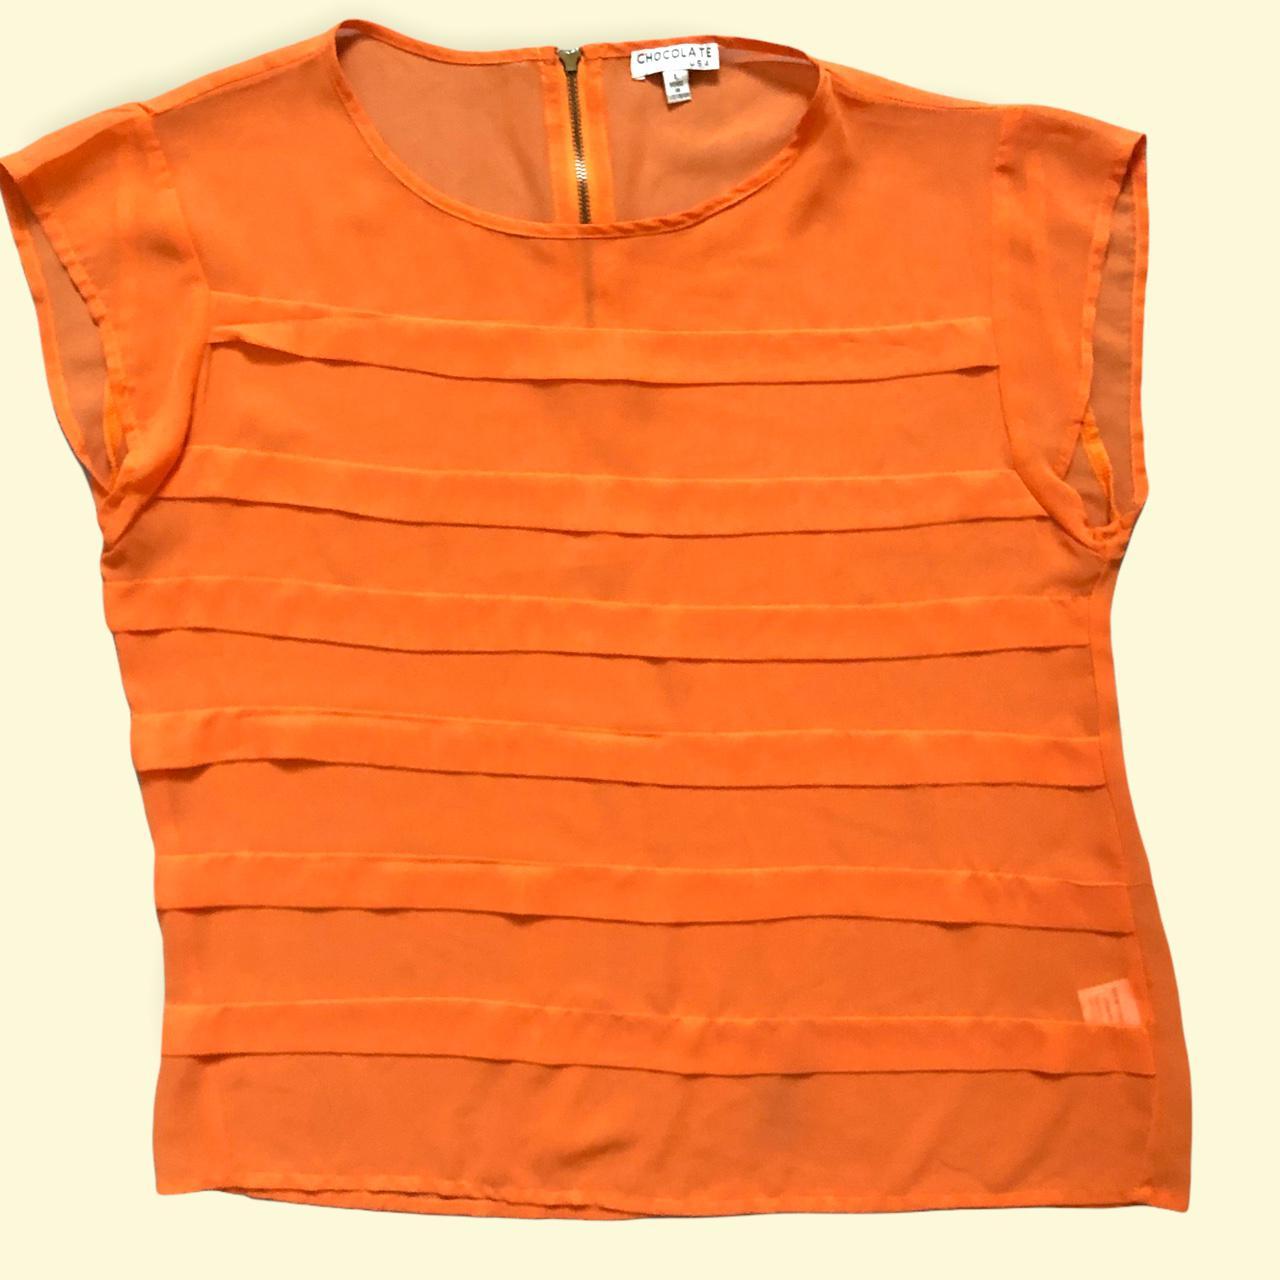 Product Image 3 - Orange front tiered boxy top